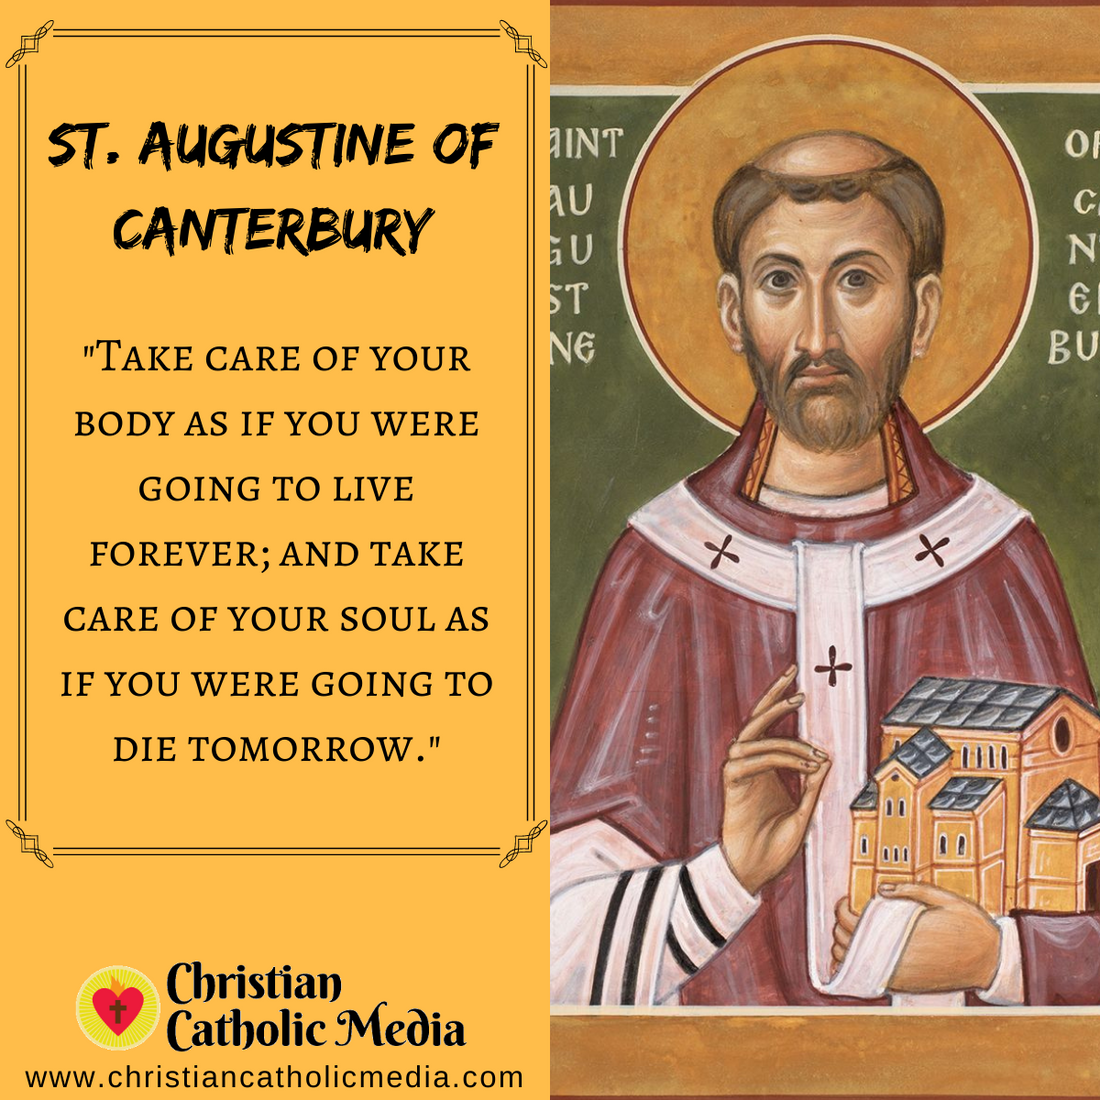 St. Augustine of Canterbury - Friday May 27, 2022